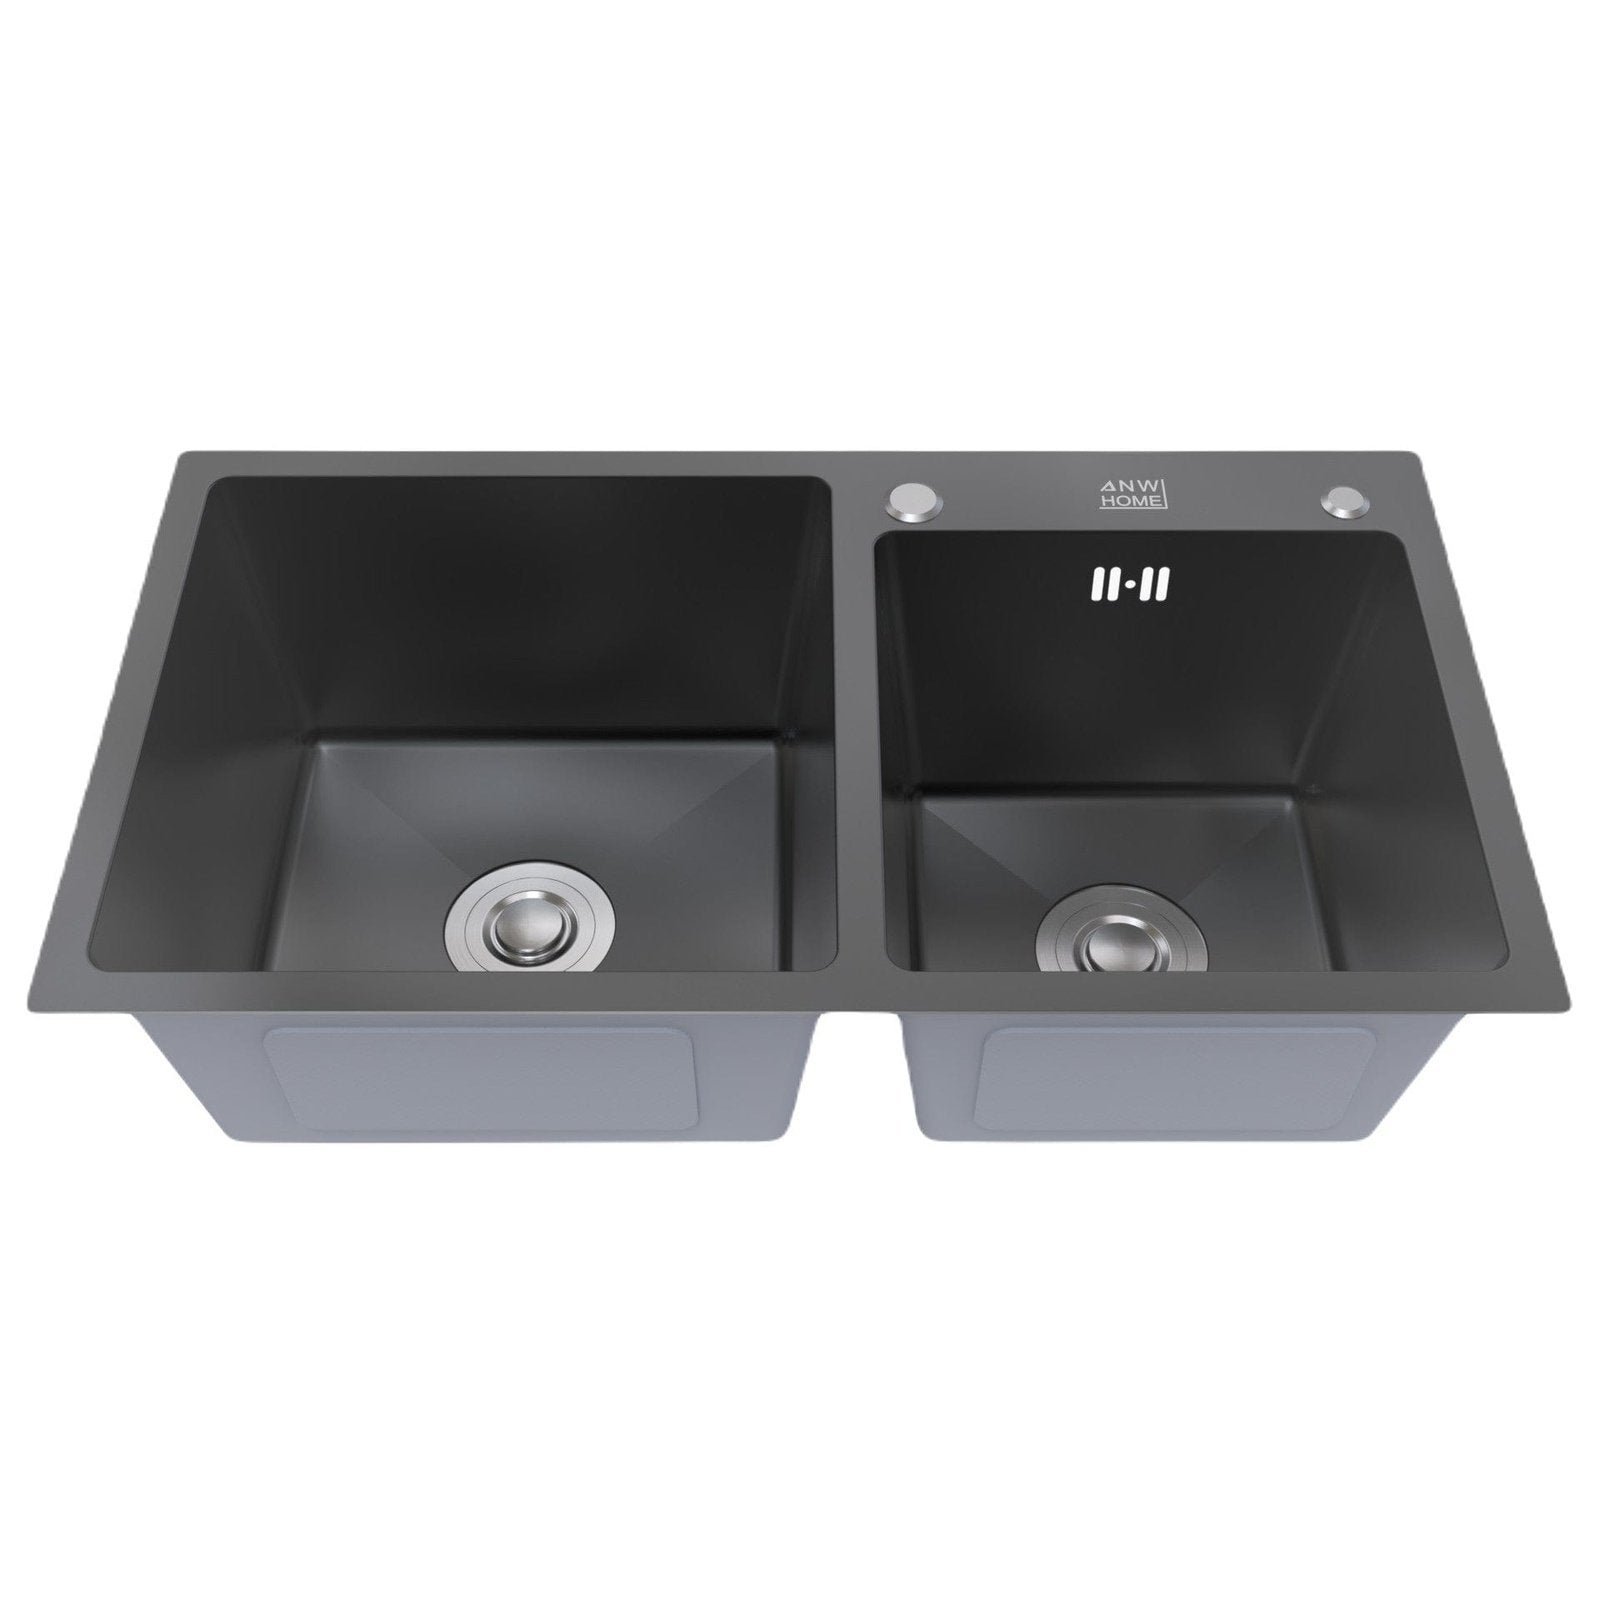 Buy Double Bowl Kitchen Bar Sink 78x46cm with Waste & Basket | Shop at Supply Master Accra, Ghana Kitchen Sink Black Buy Tools hardware Building materials